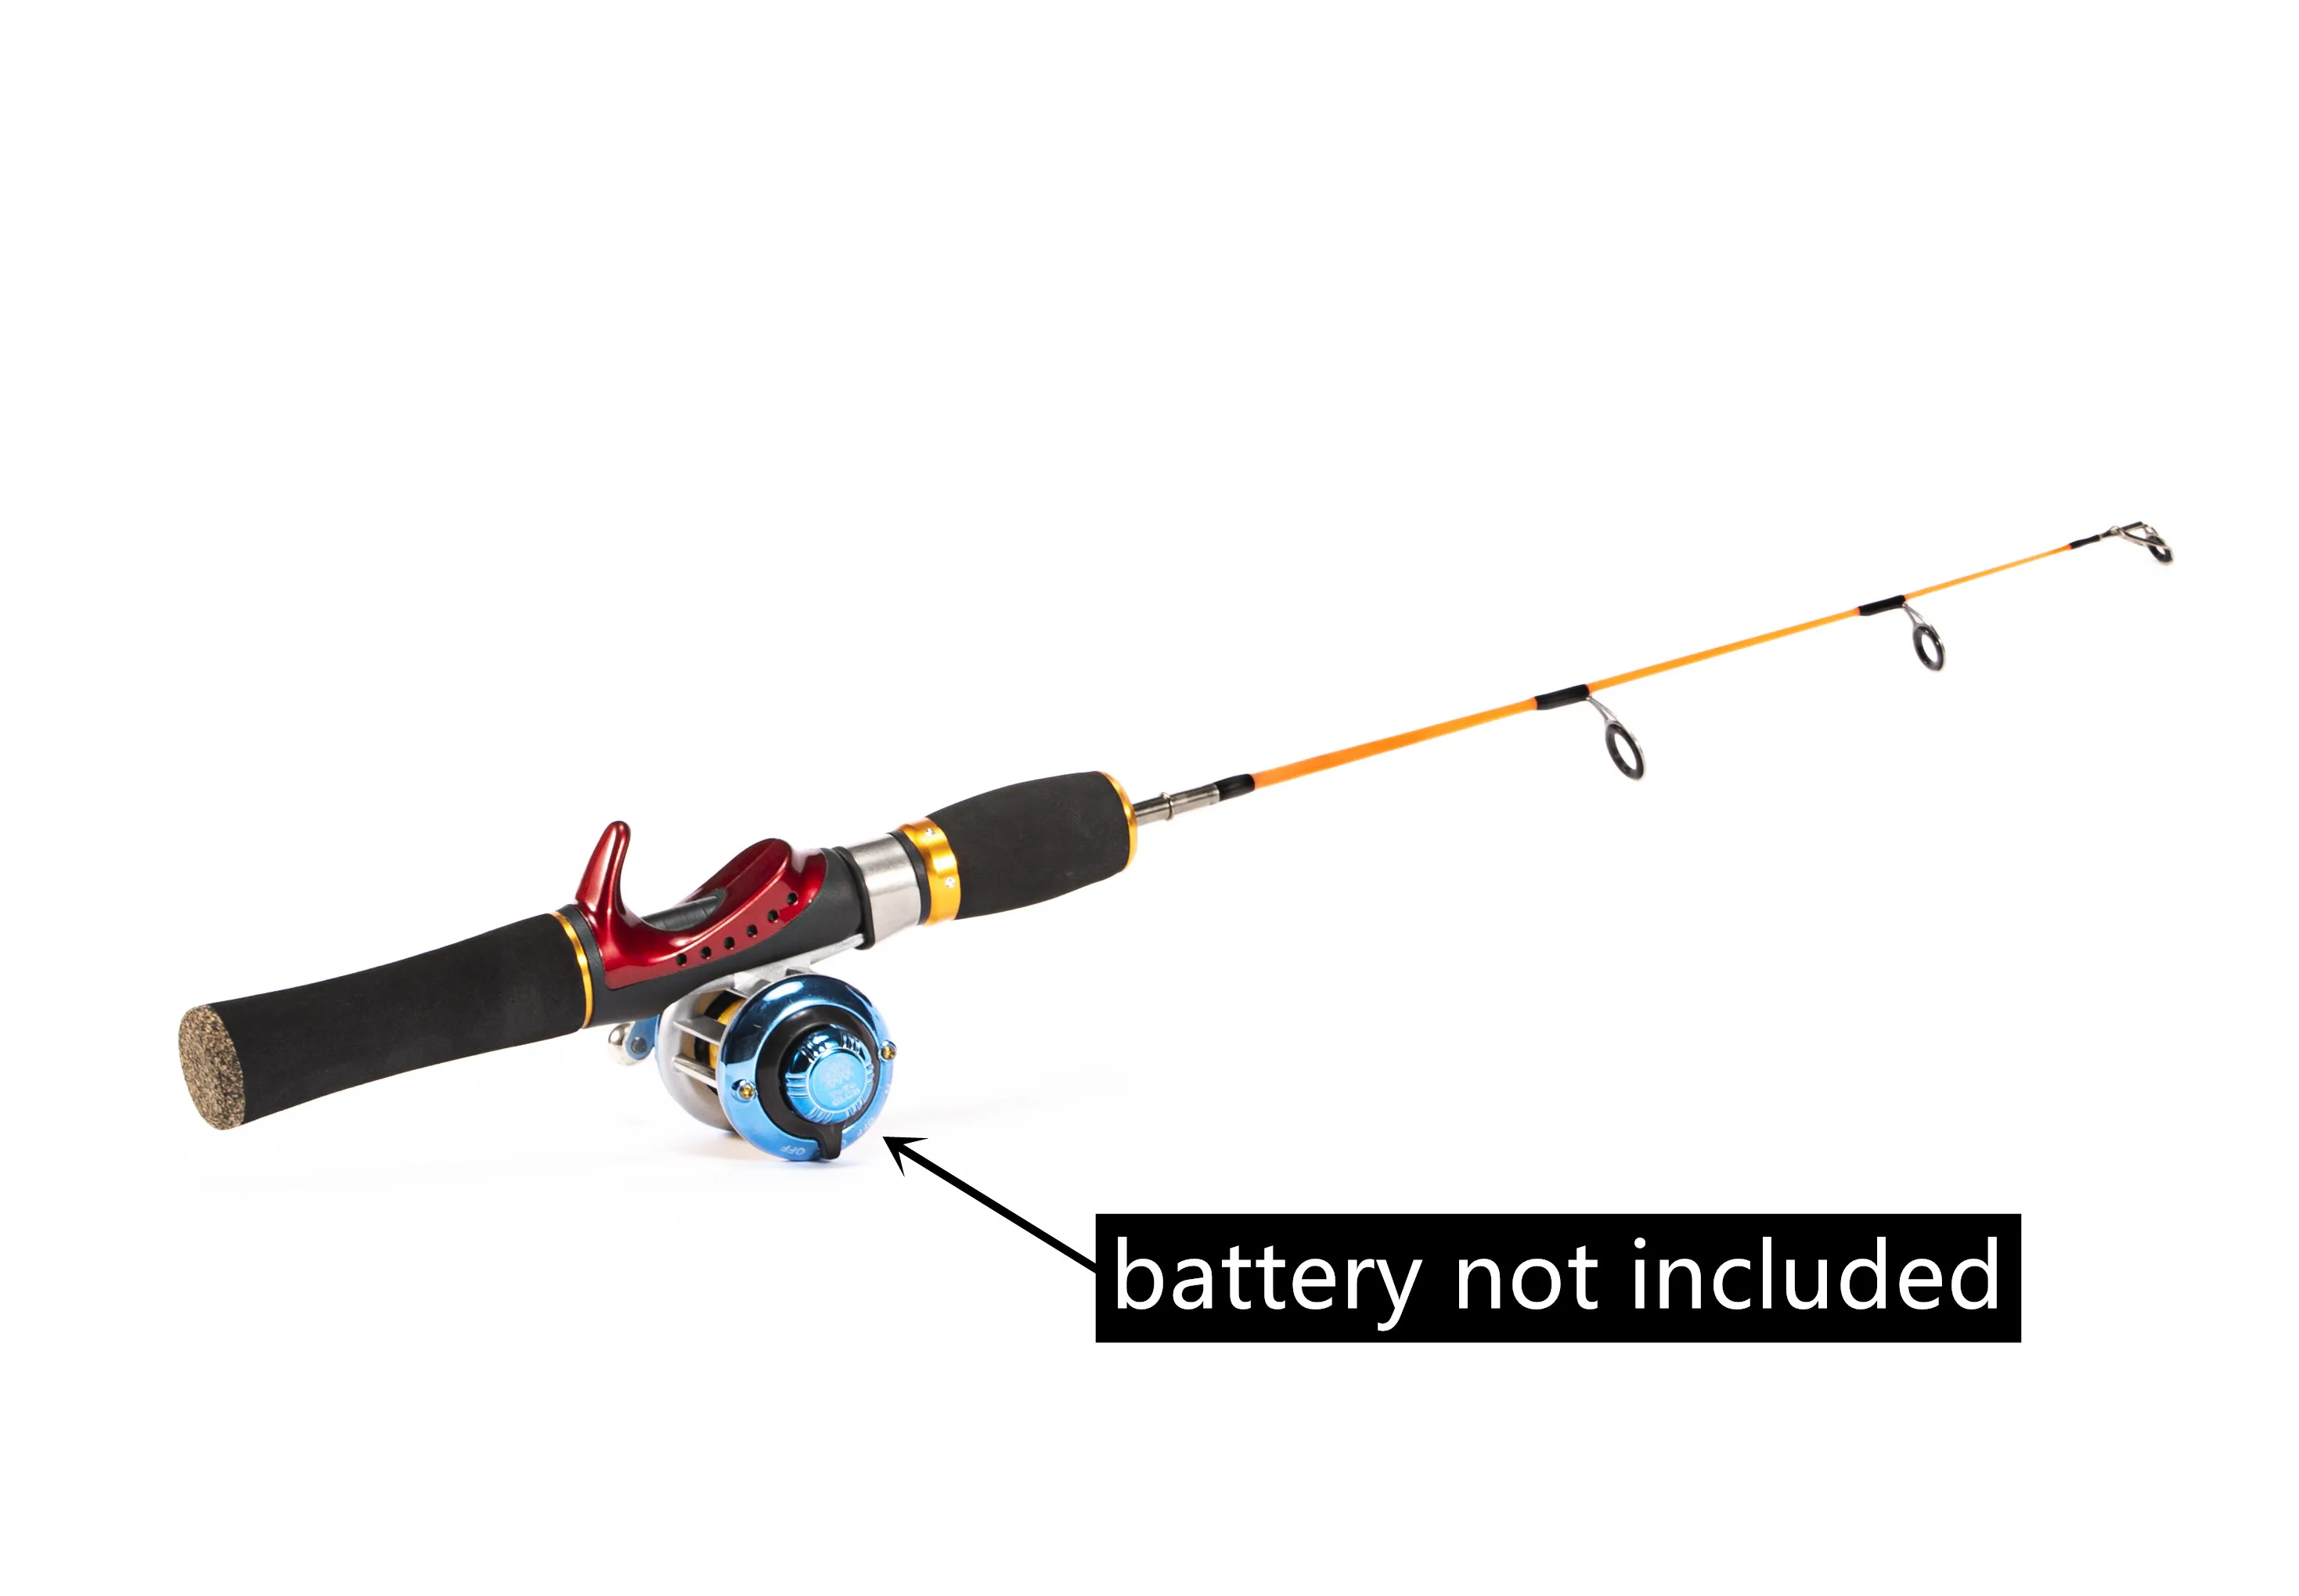 Portable Pocket Winter Fishing Rods Ice Fishing Rods Fishing Reels Rod Combo Pen Pole Lures Tackle Spinning Casting Hard Rod